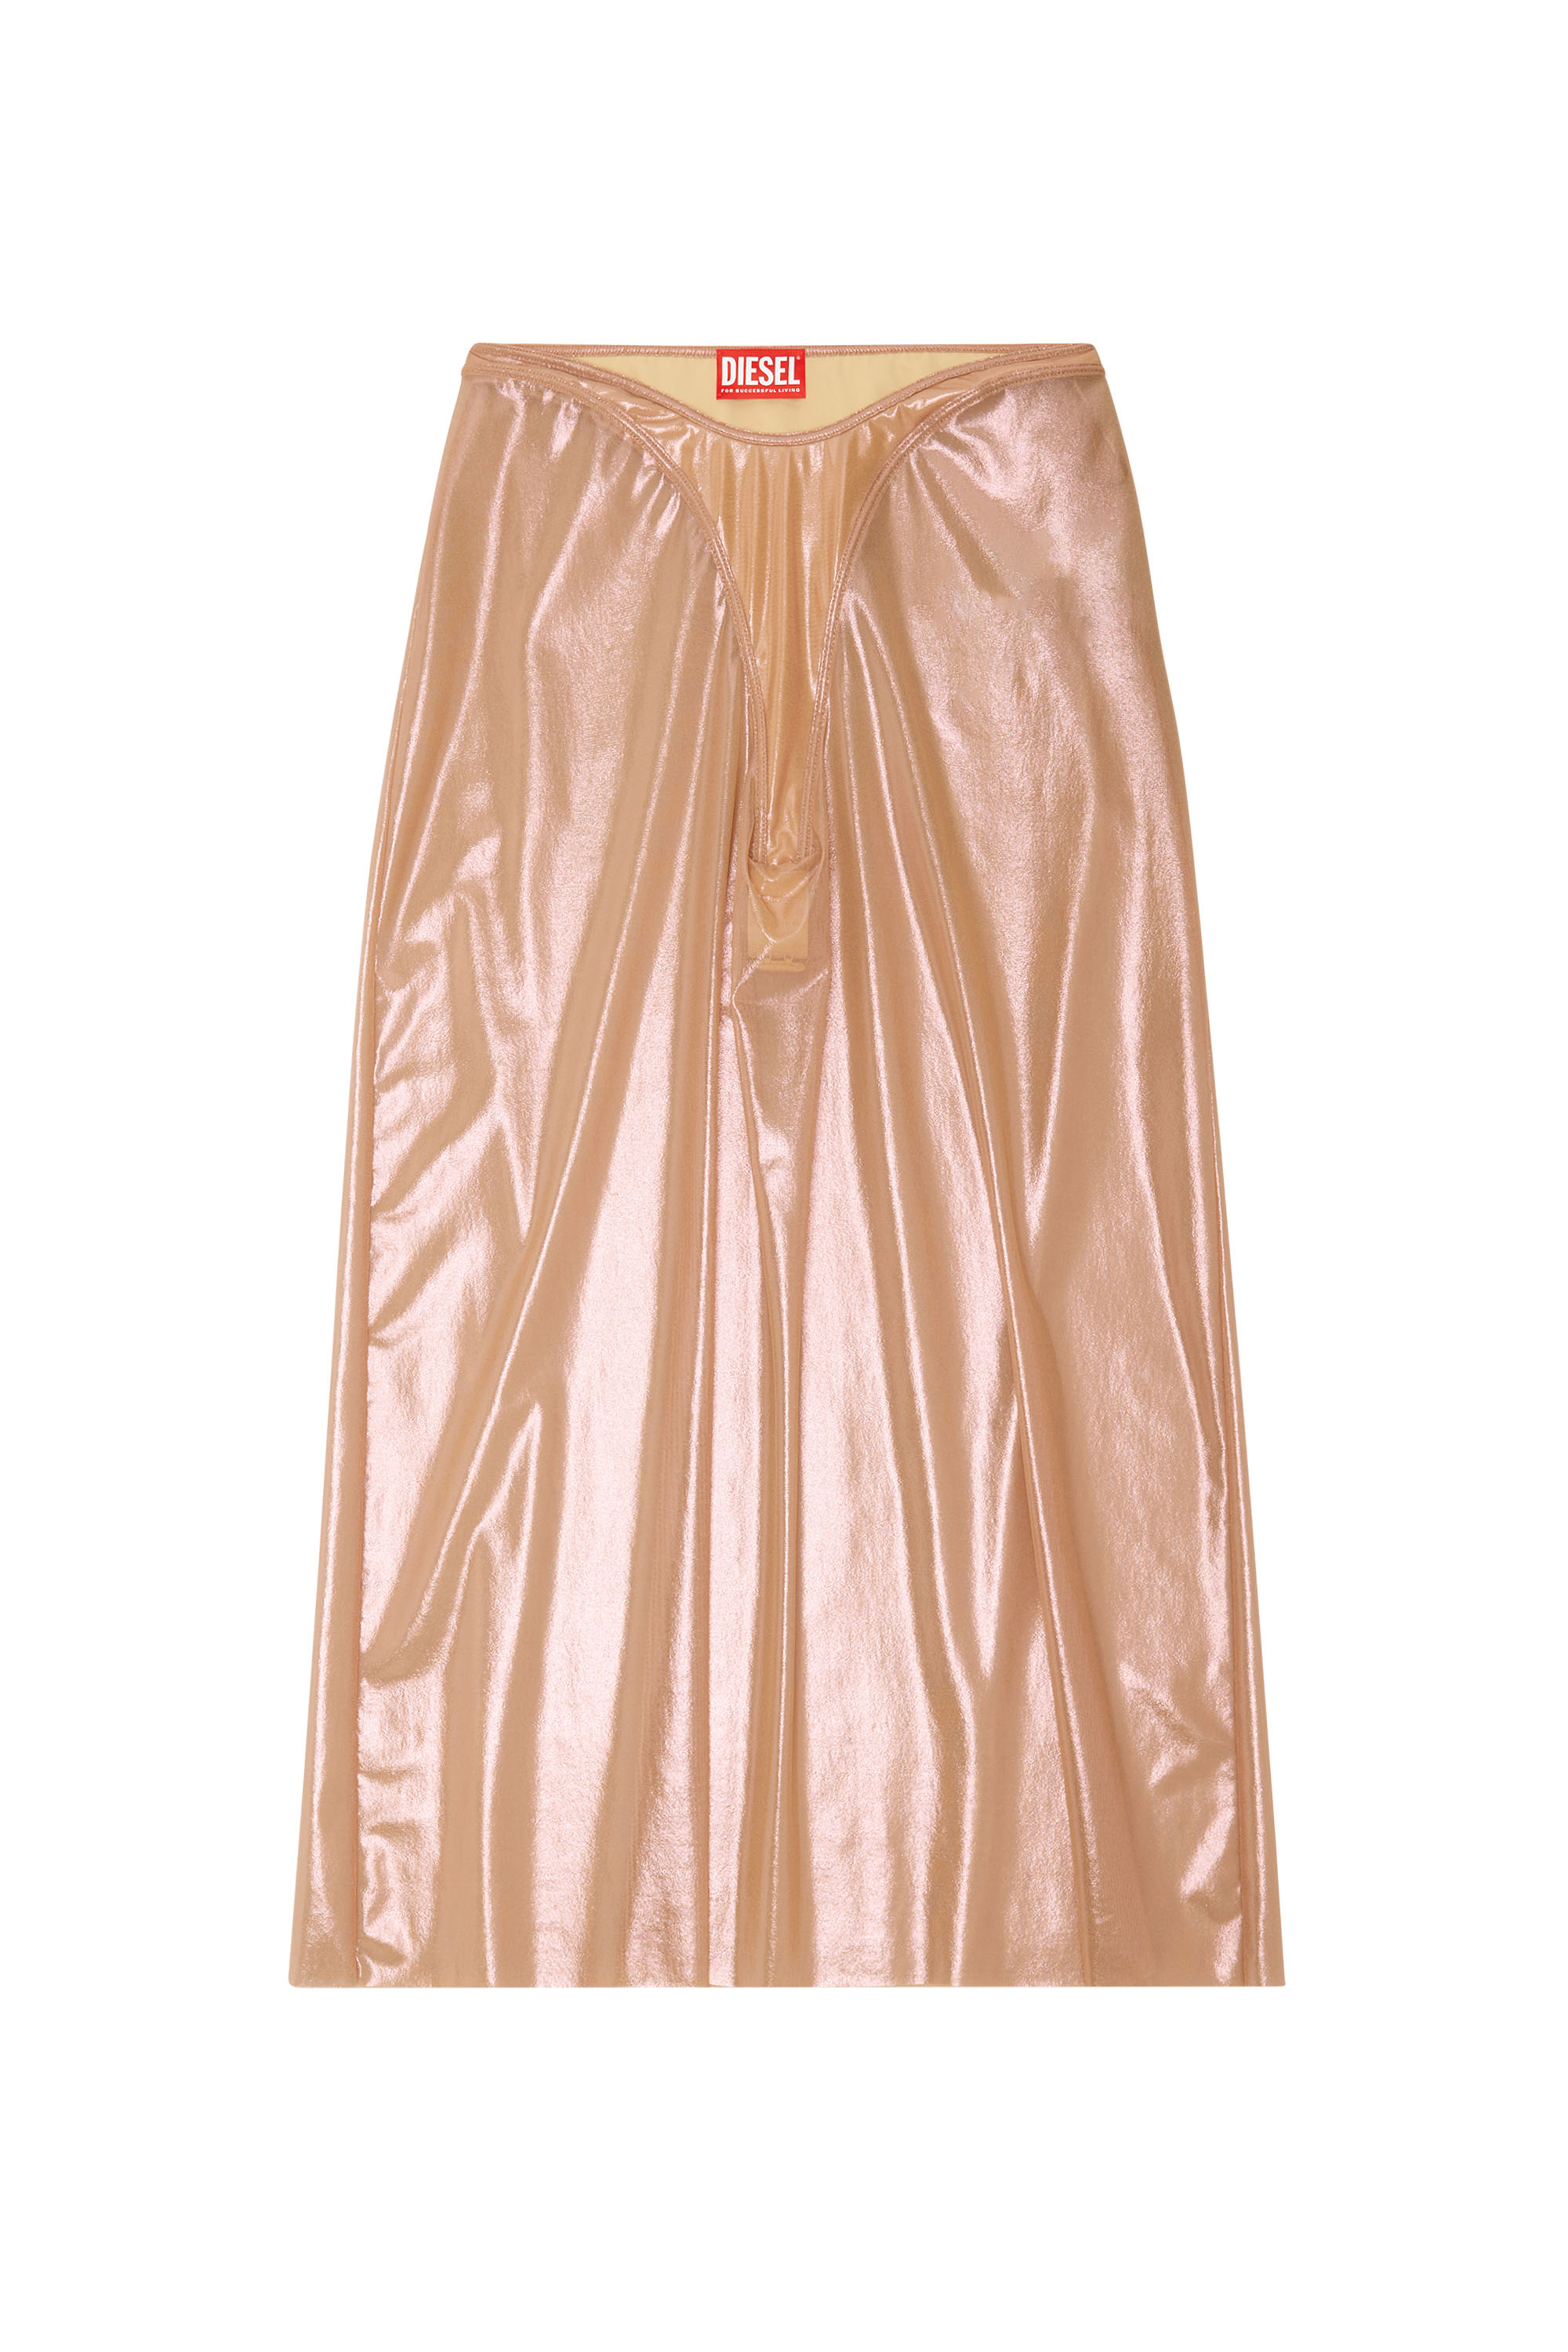 Diesel - O-MONI, Woman Sheer midi skirt in shiny coated tulle in Pink - Image 5